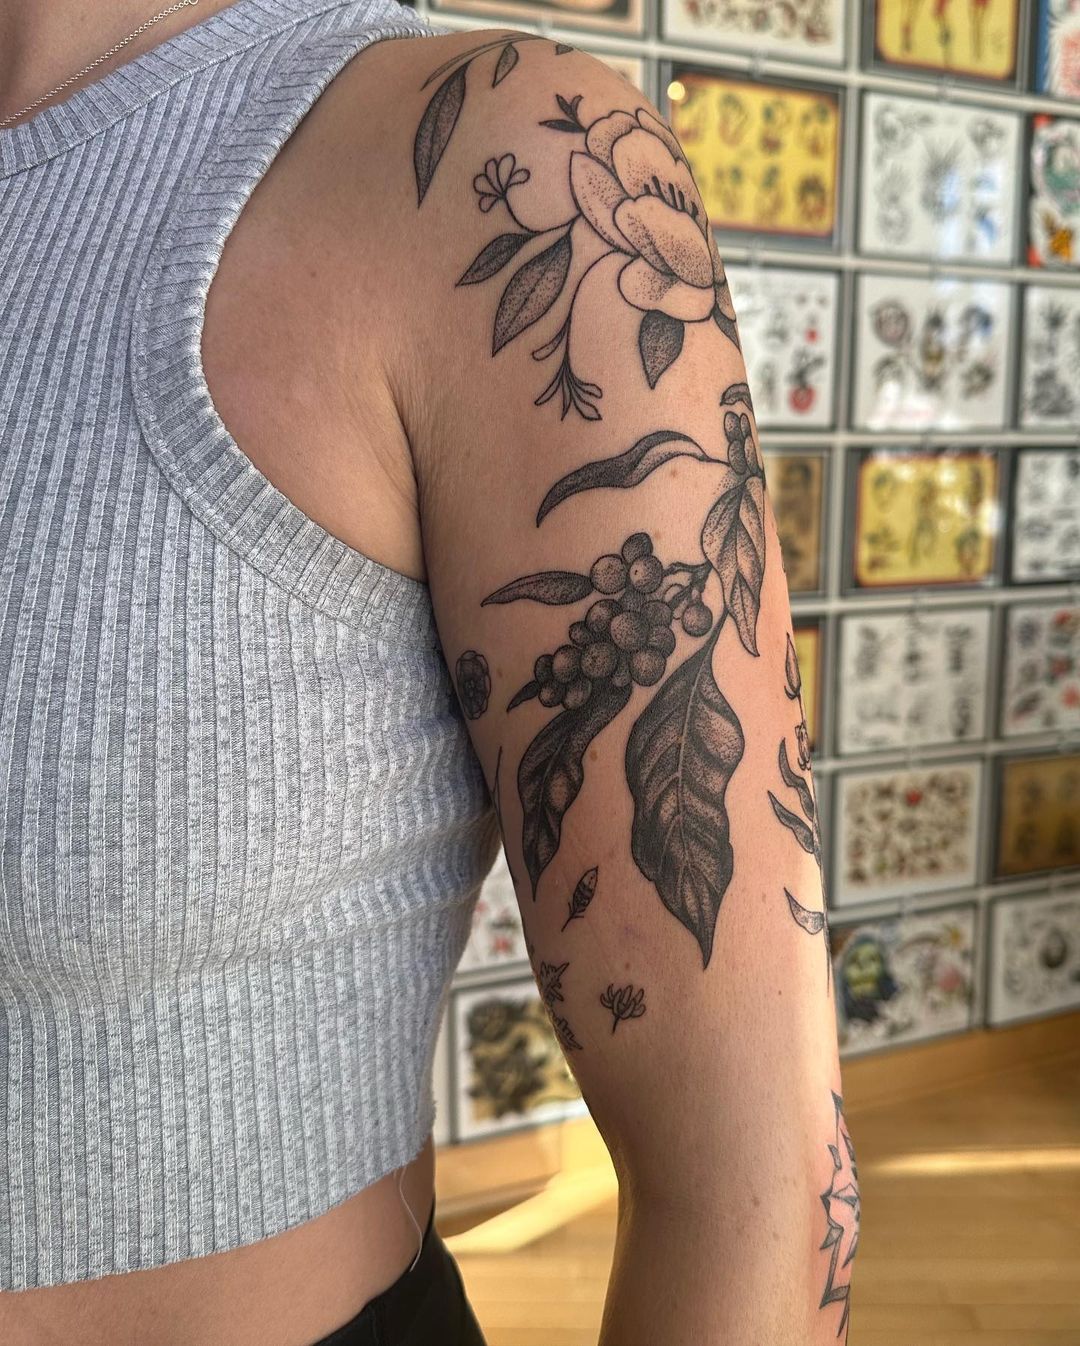 Tattoo uploaded by Austin • Work I would like to get done Right Arm Tattoo  Description**: *Theme*: Wild and Otherworldly Floral Arrangement *Design*:  - Begin with a soft pastel floral arrangement that